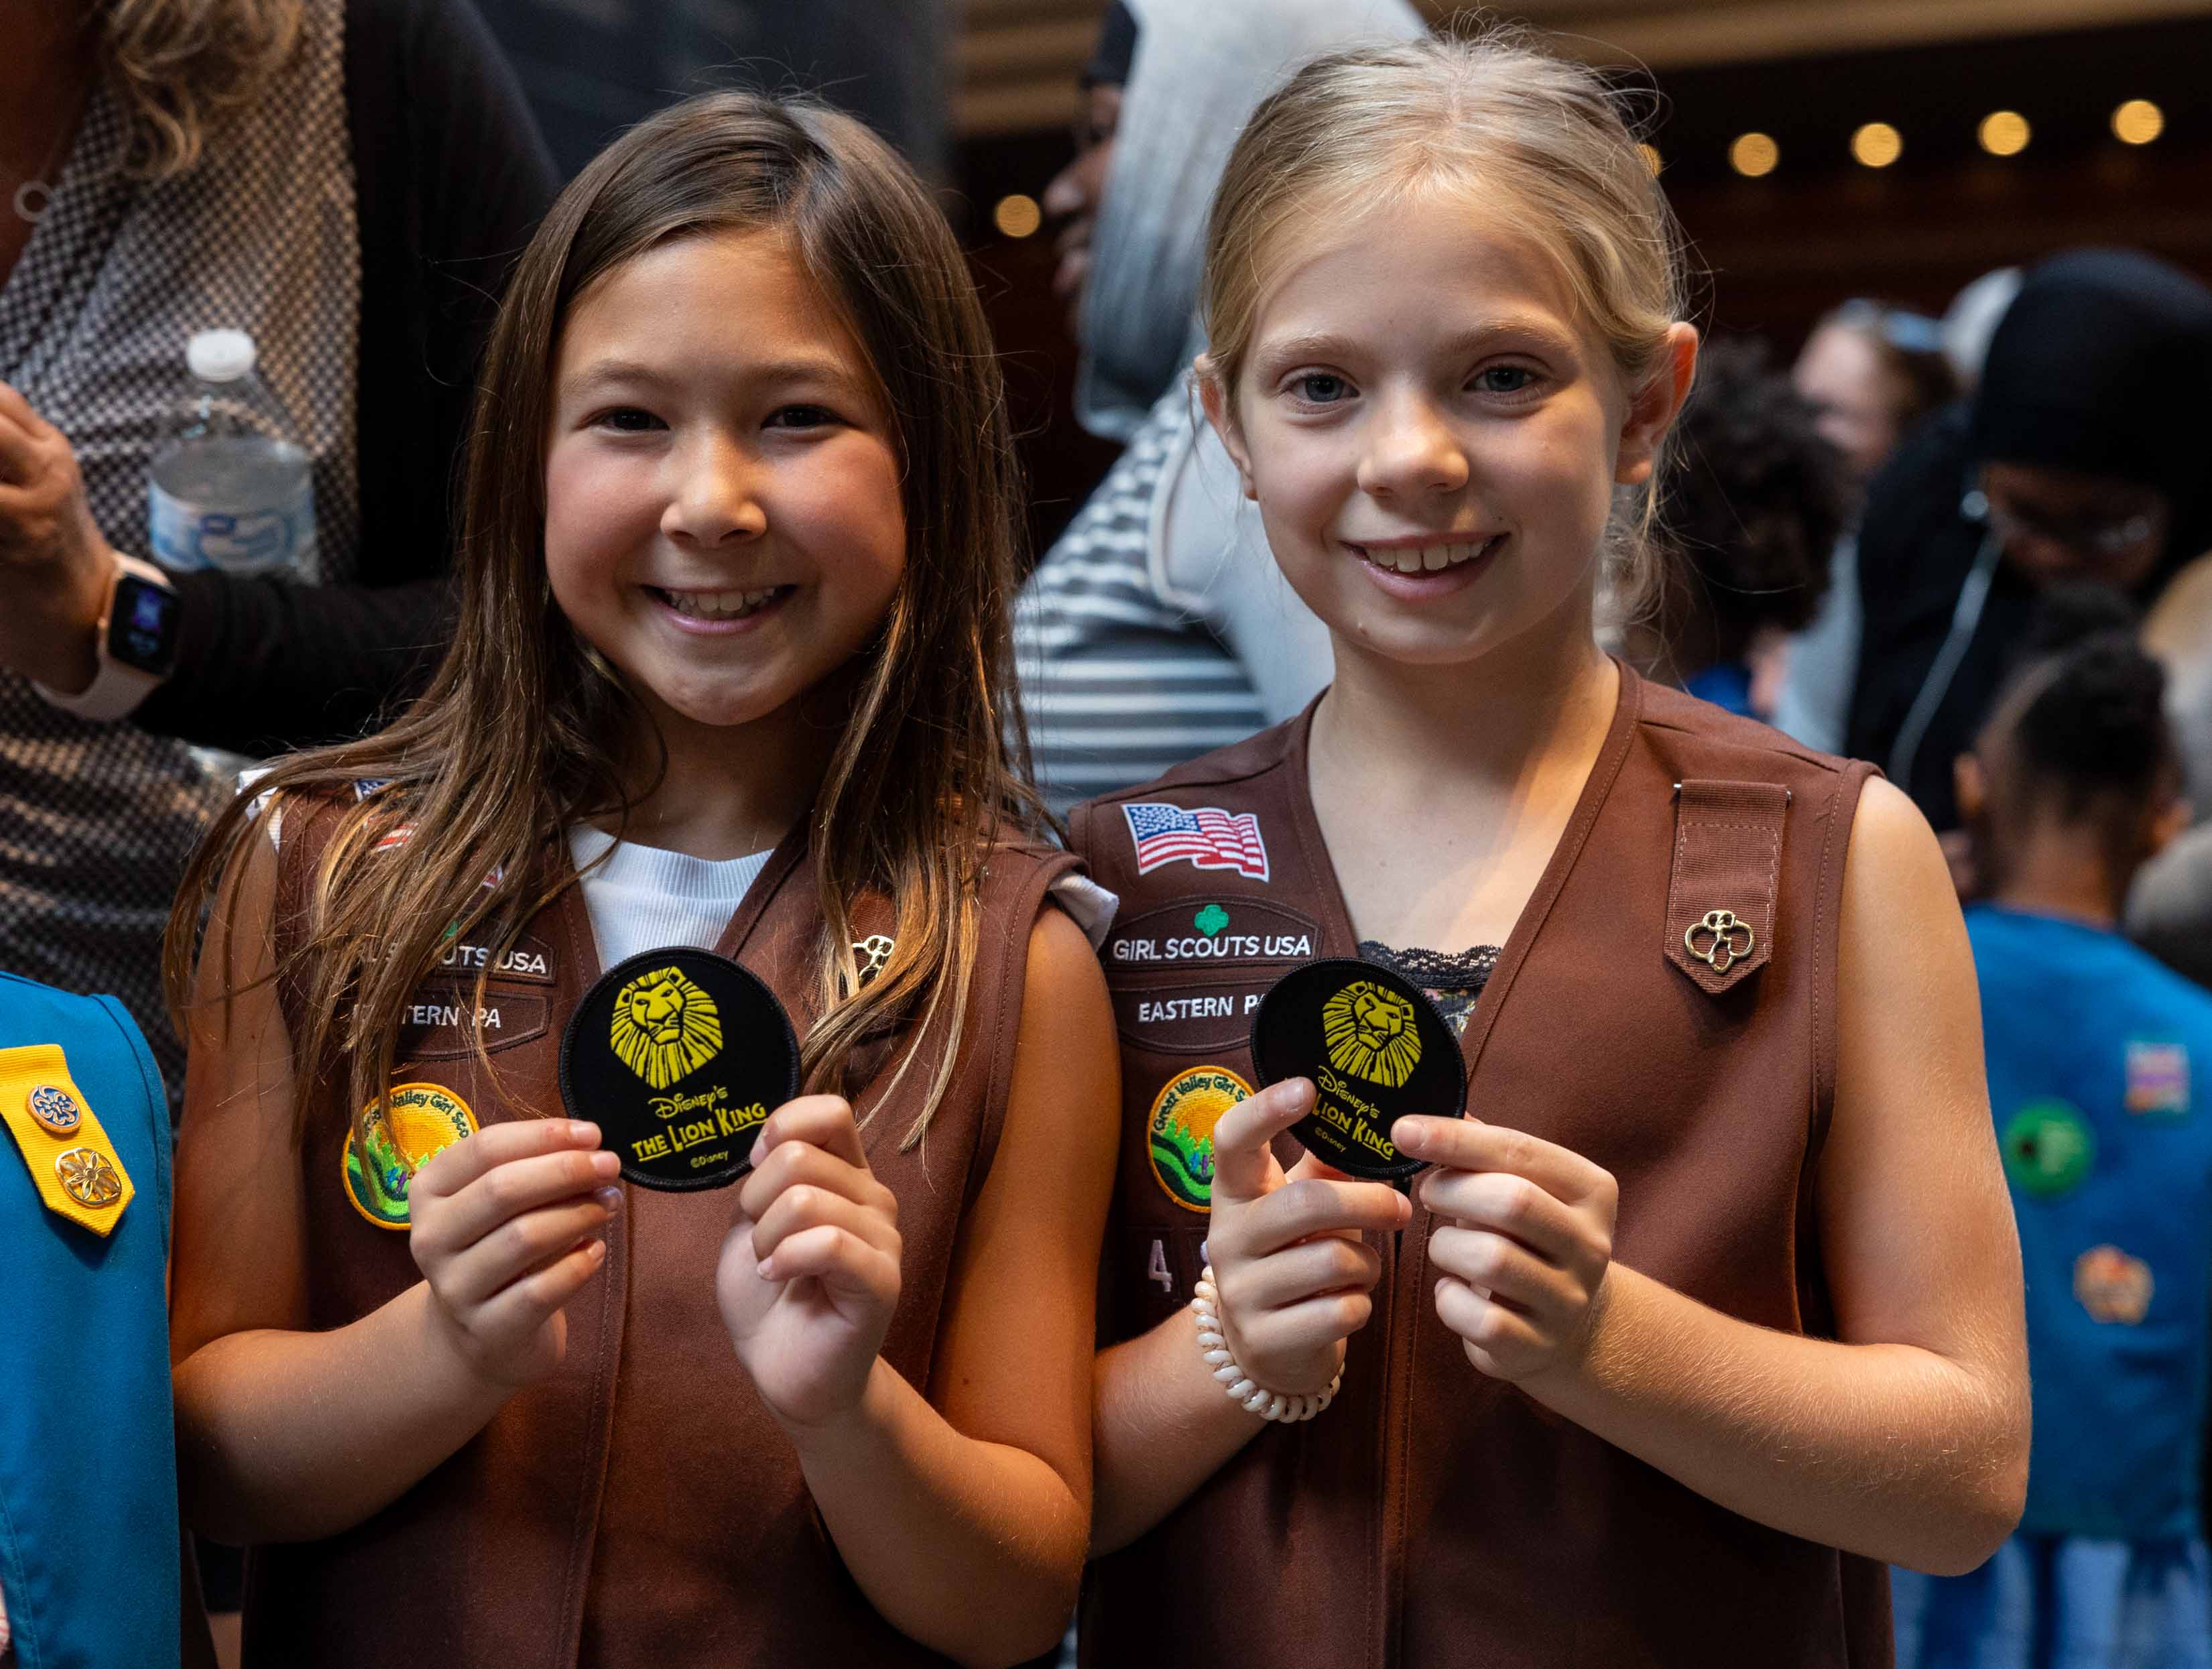 Two young girls in Gril Scout vests hold small badges embroidered with Disney's The Lion King logo